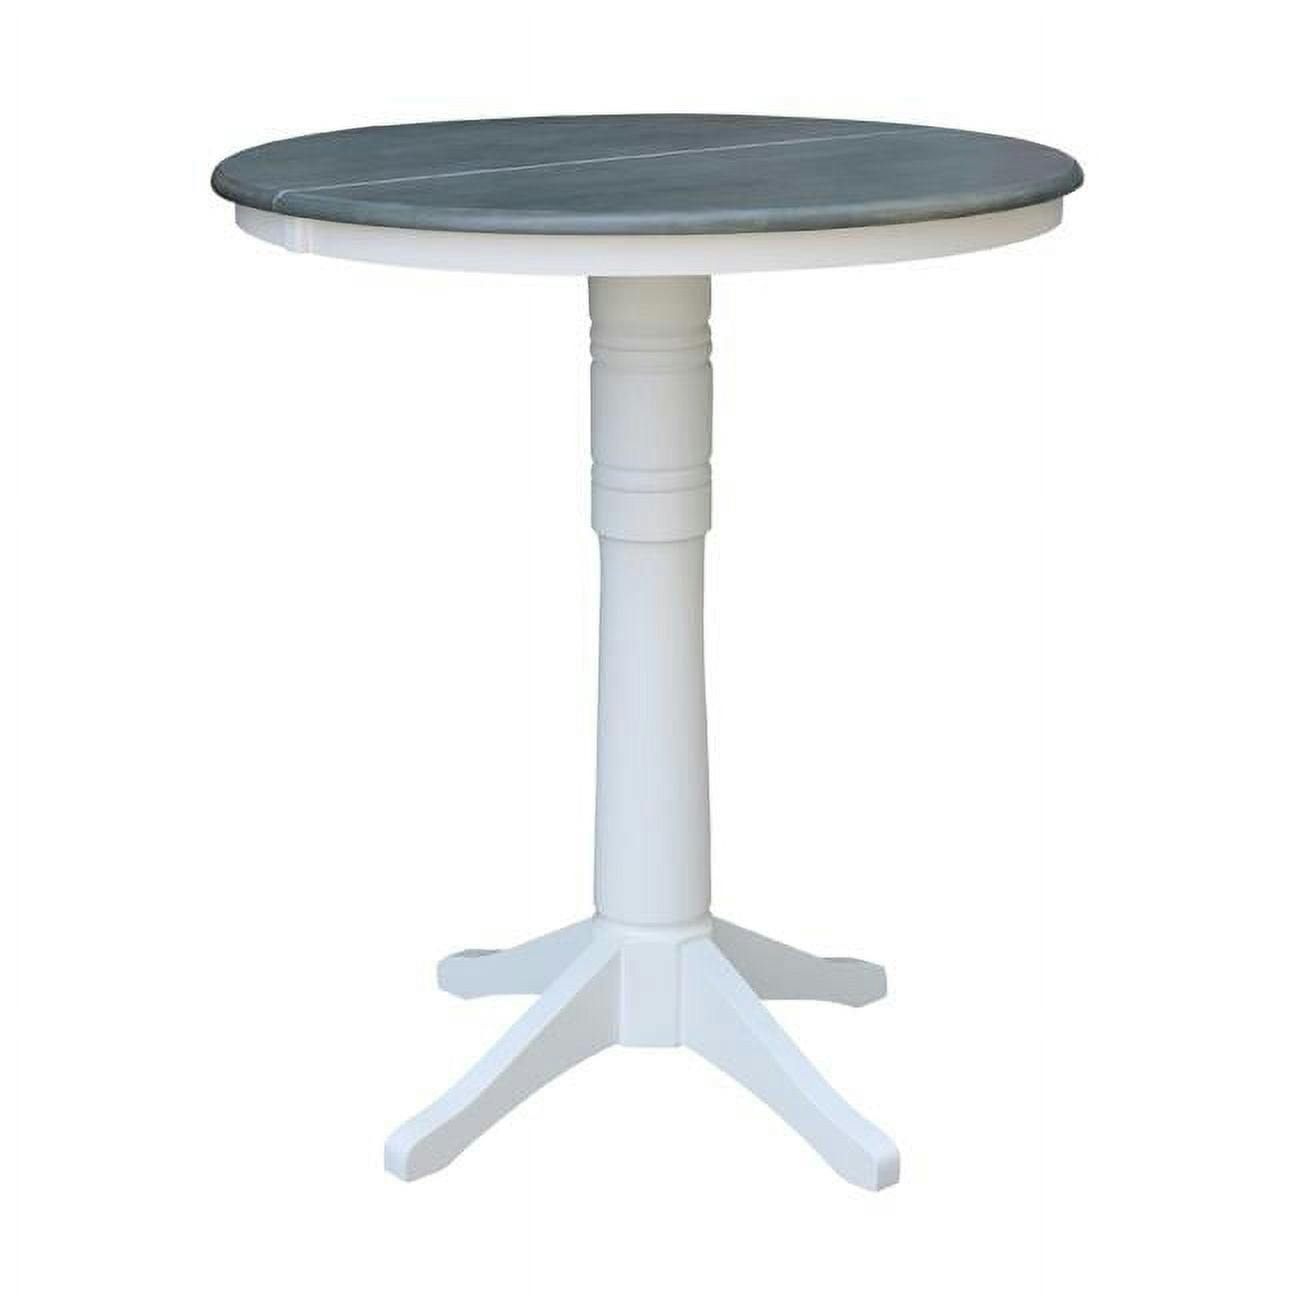 Heather Gray 50" Round Solid Wood Pedestal Bar Height Table with Extendable Leaf